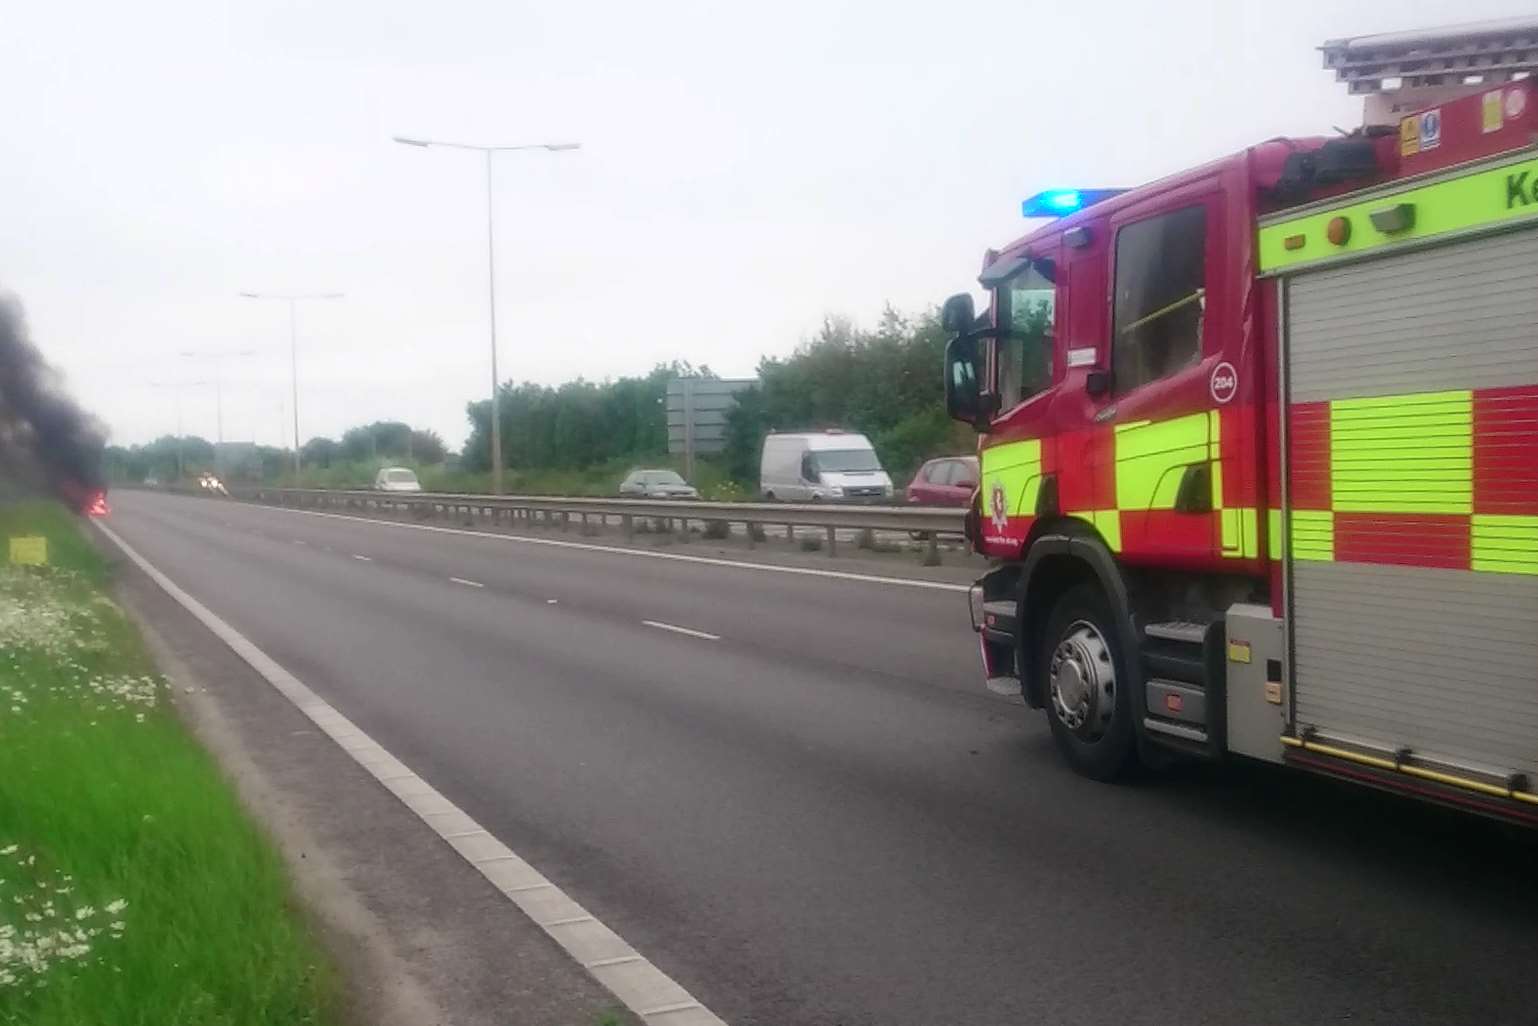 Fire engines rush to tackle the car fire on Thanet Way